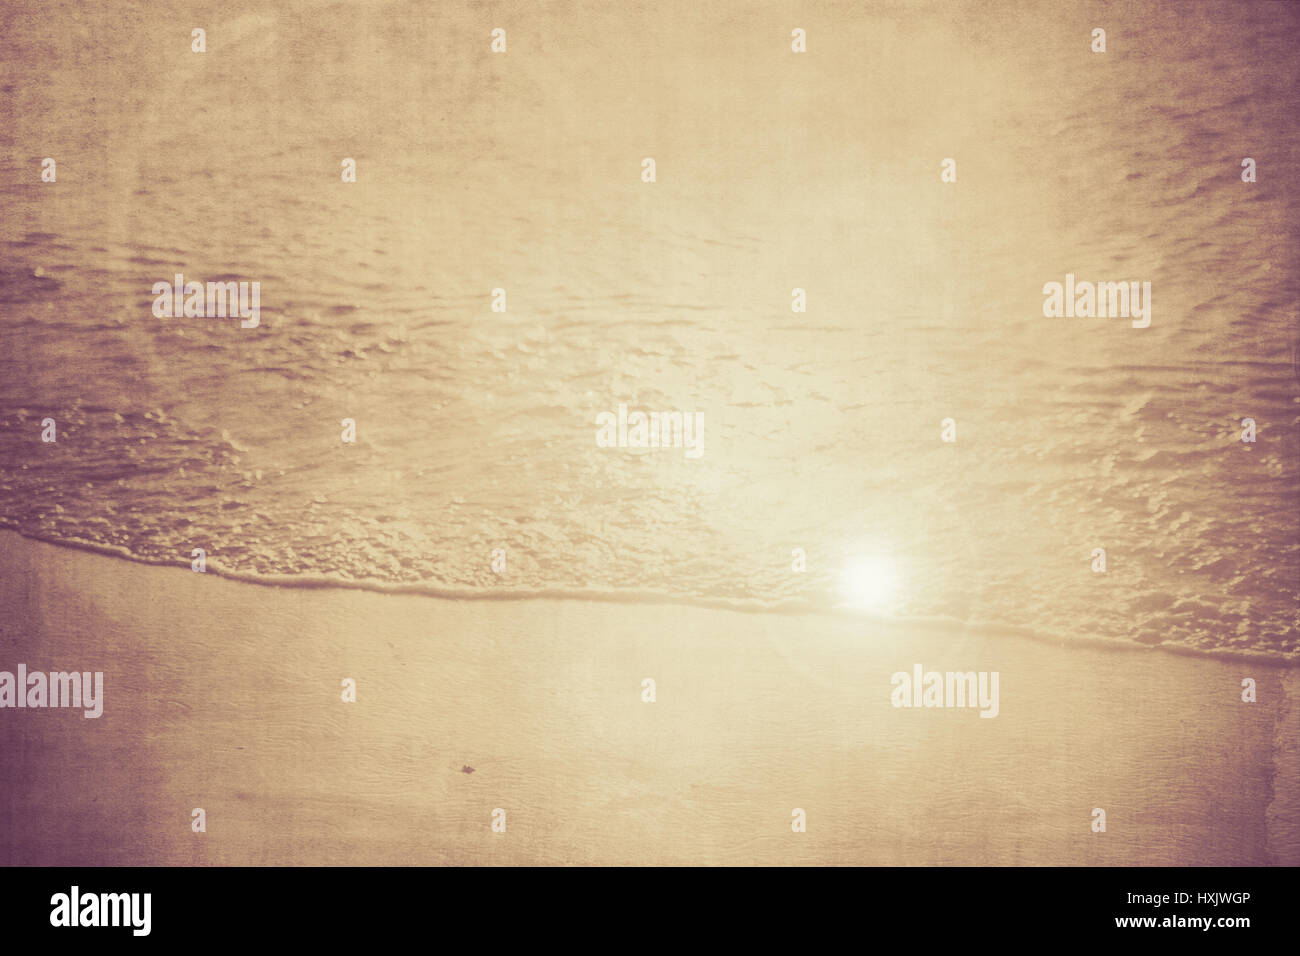 Vintage textured Beach nature backdrop with ocean water, sand and sun flare Stock Photo